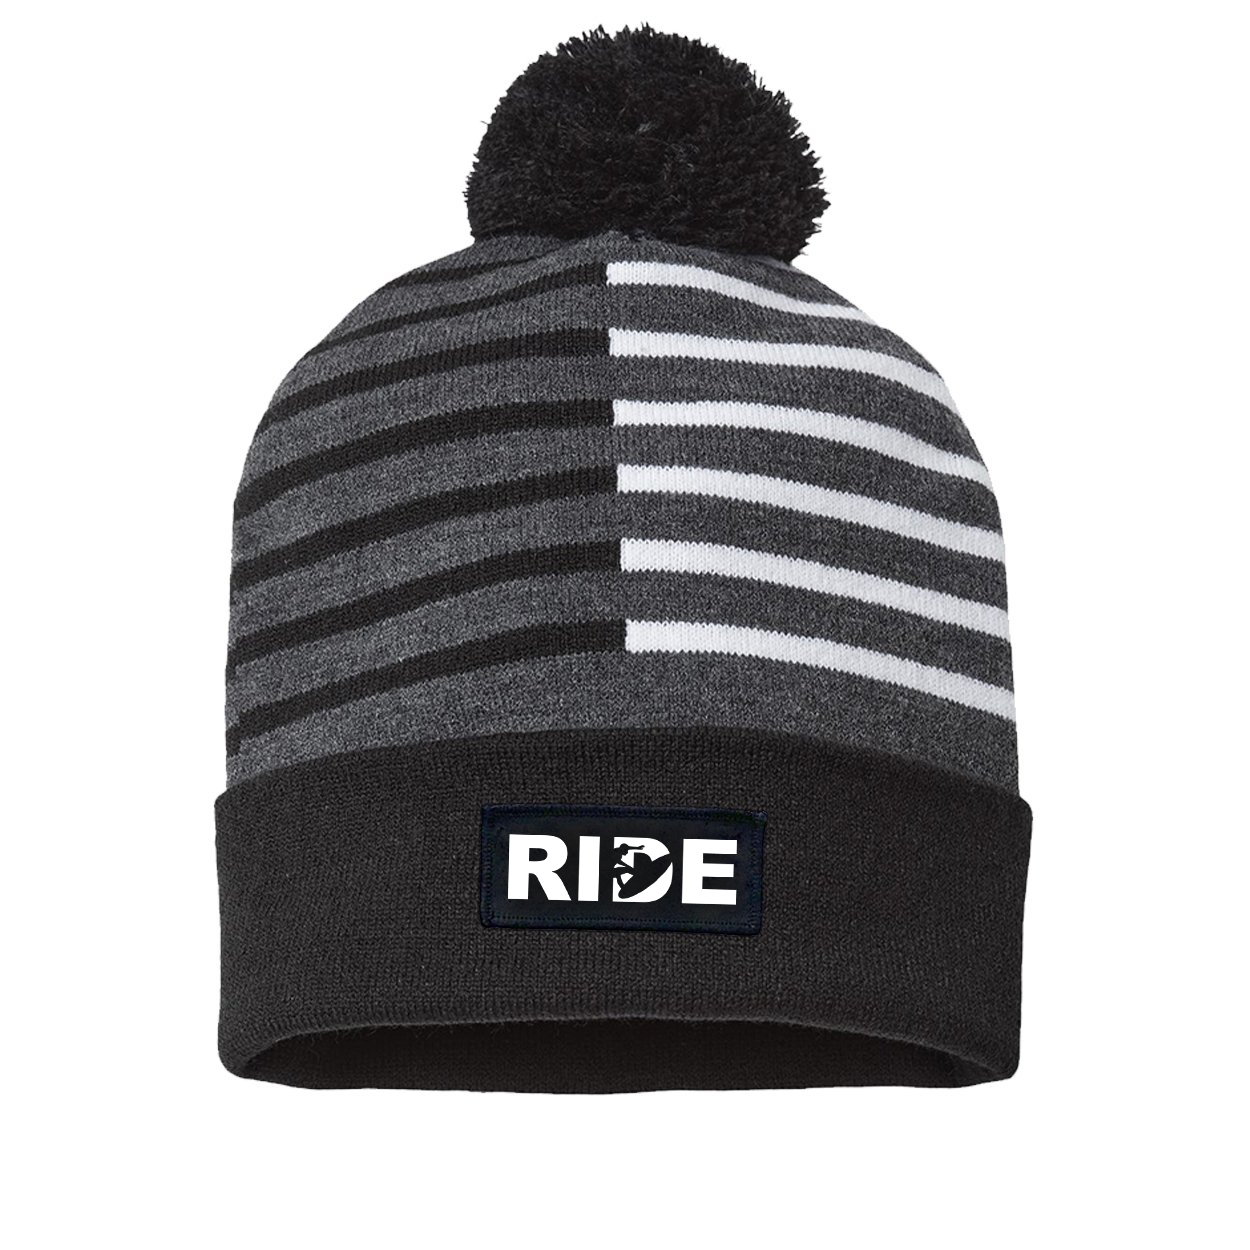 Ride Surf Logo Night Out Woven Patch Roll Up Pom Knit Beanie Half Color Black/White (White Logo)